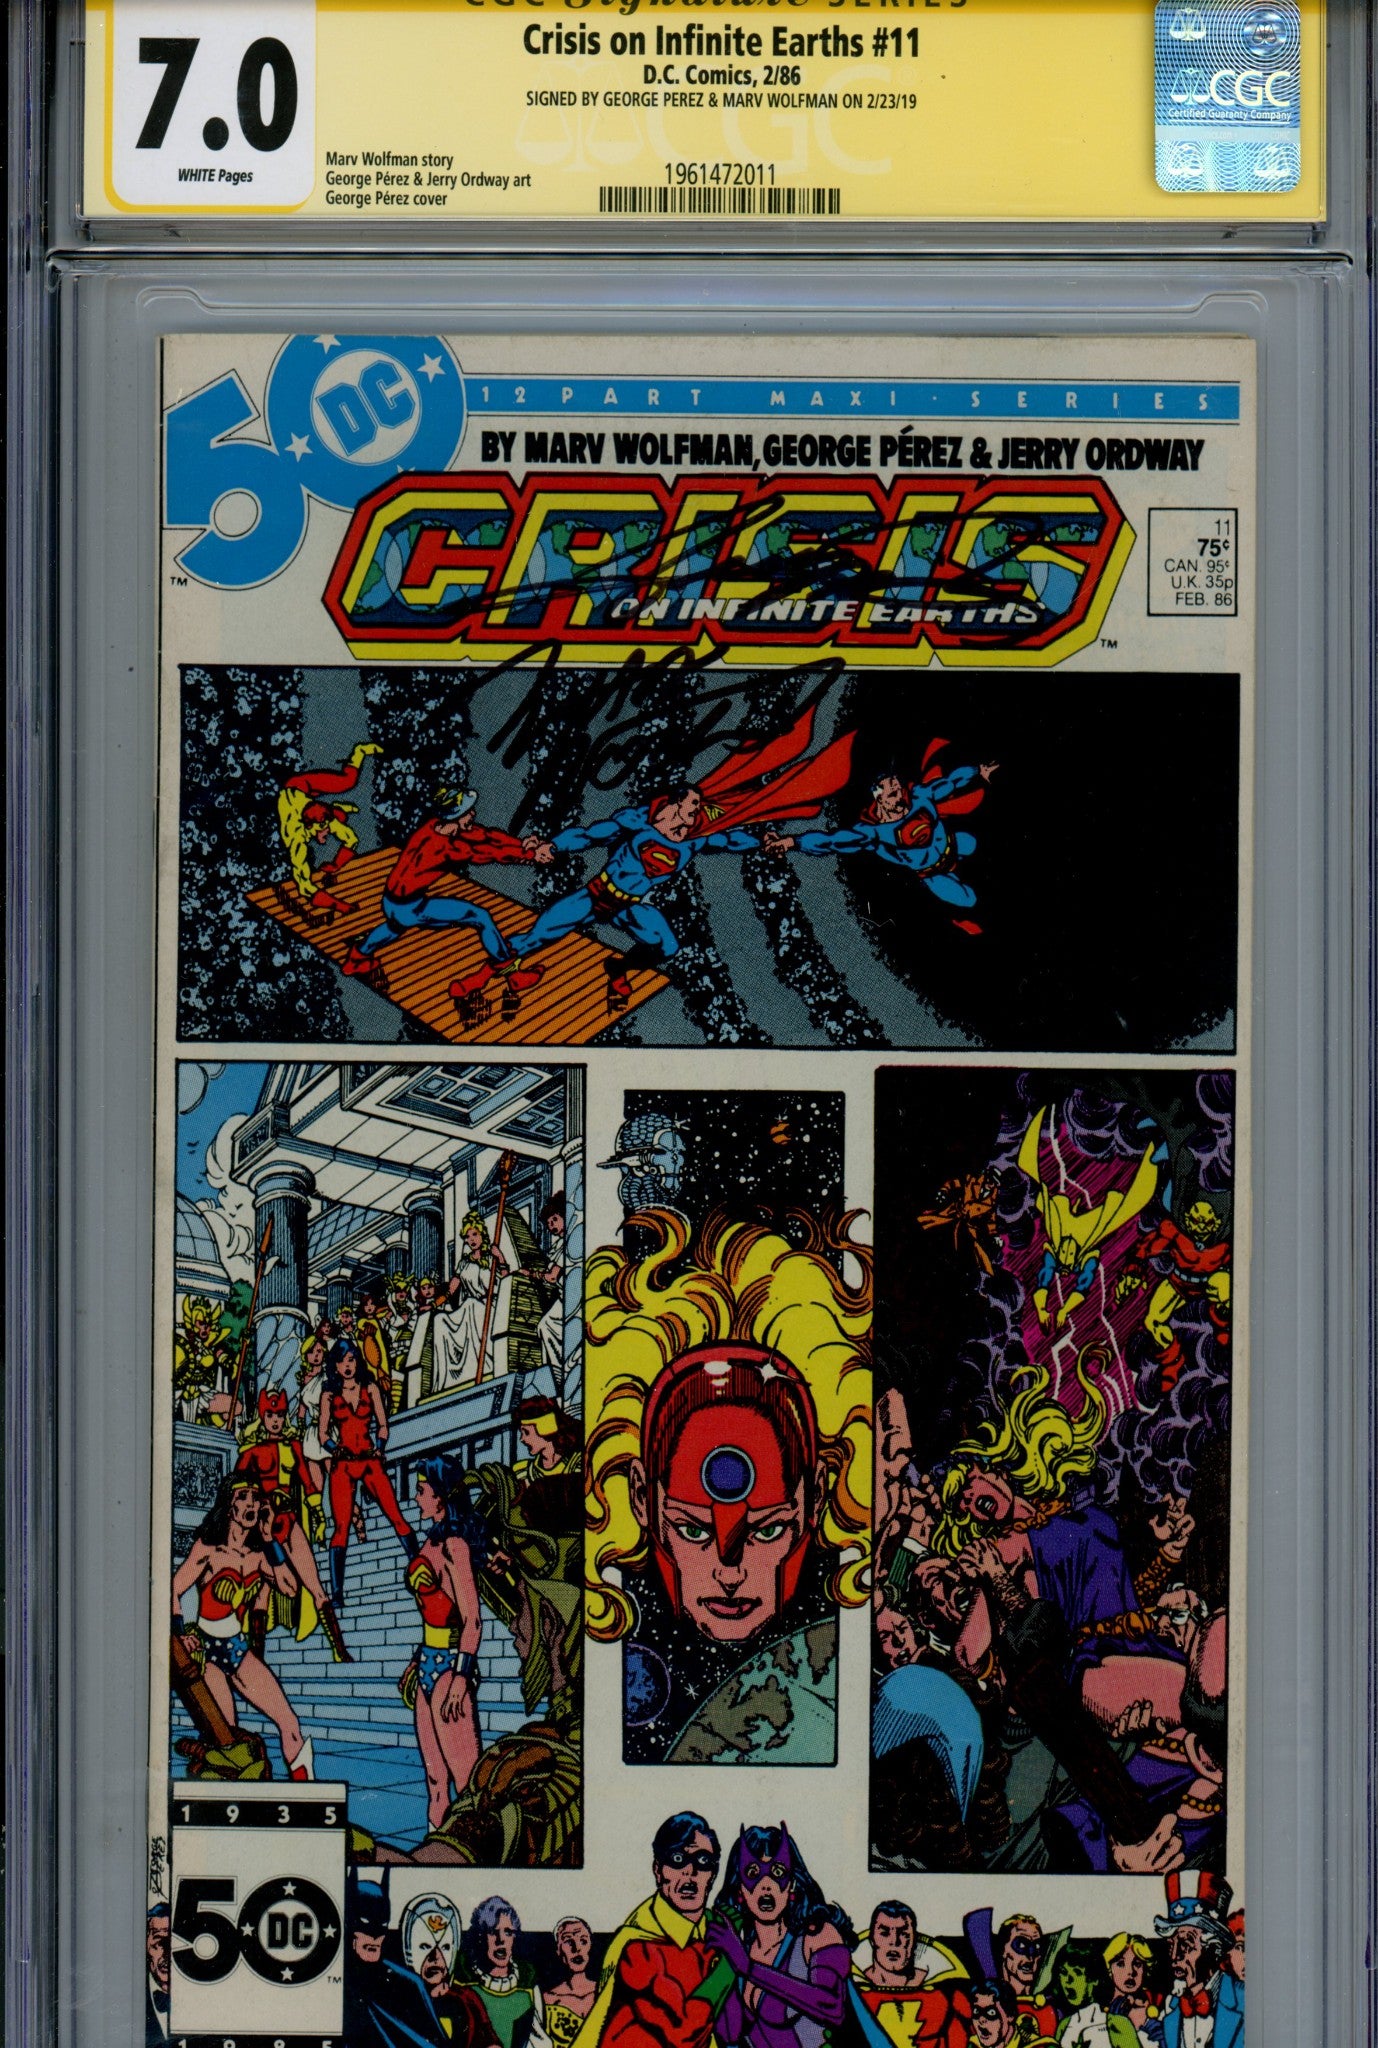 Crisis on Infinite Earths 11 CGC 7.0 (FN/VF) (1986) Signed x2 Cover George Perez & Marv Wolfman 